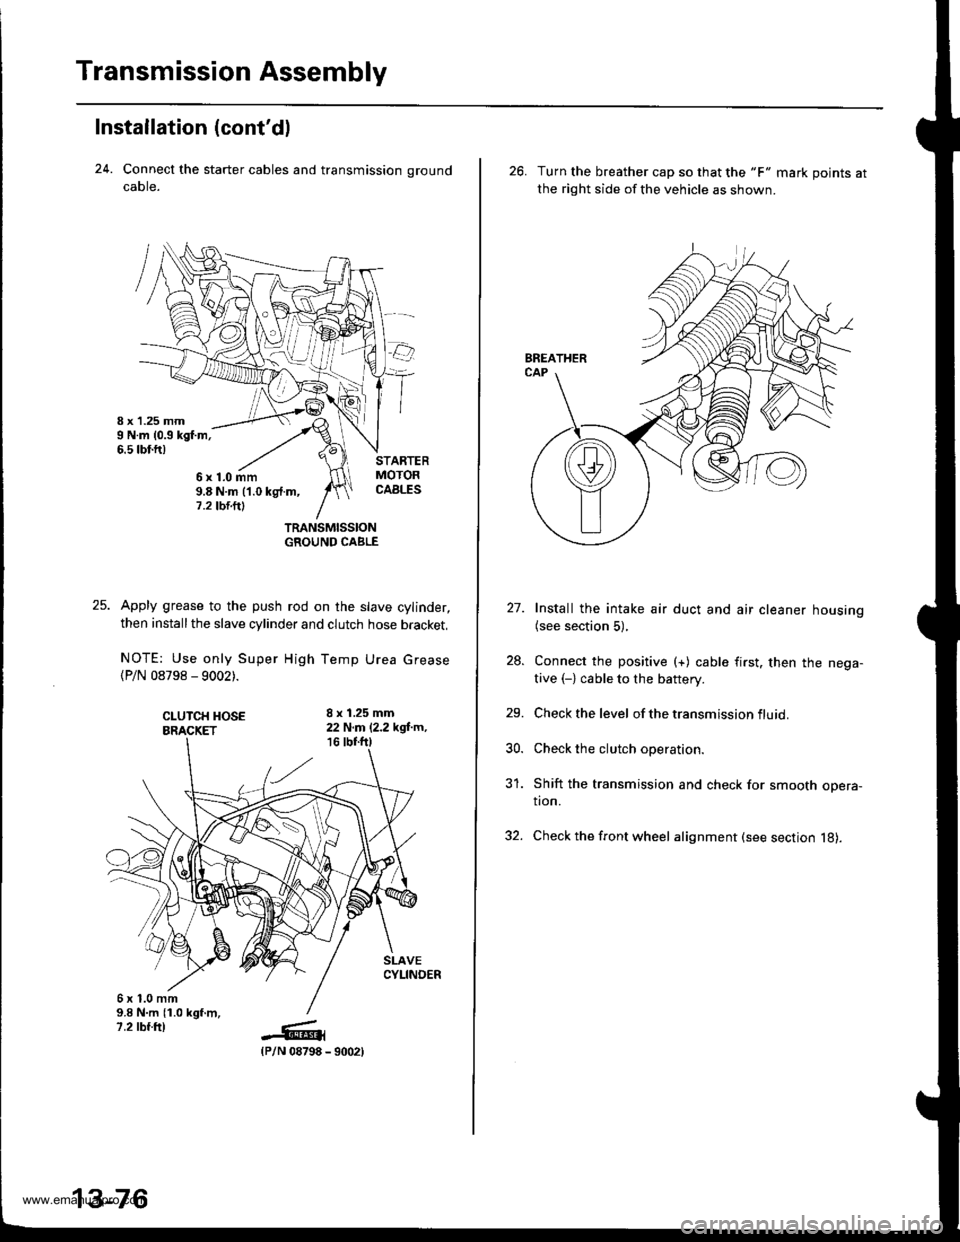 HONDA CR-V 2000 RD1-RD3 / 1.G Service Manual 
Transmission Assembly
Installation (contdl
24. Connect the starter cables and transmission ground
caore.
TRANSMISSIONGROUND CABLE
Apply grease to the push rod on the slave cylinder,
then install the